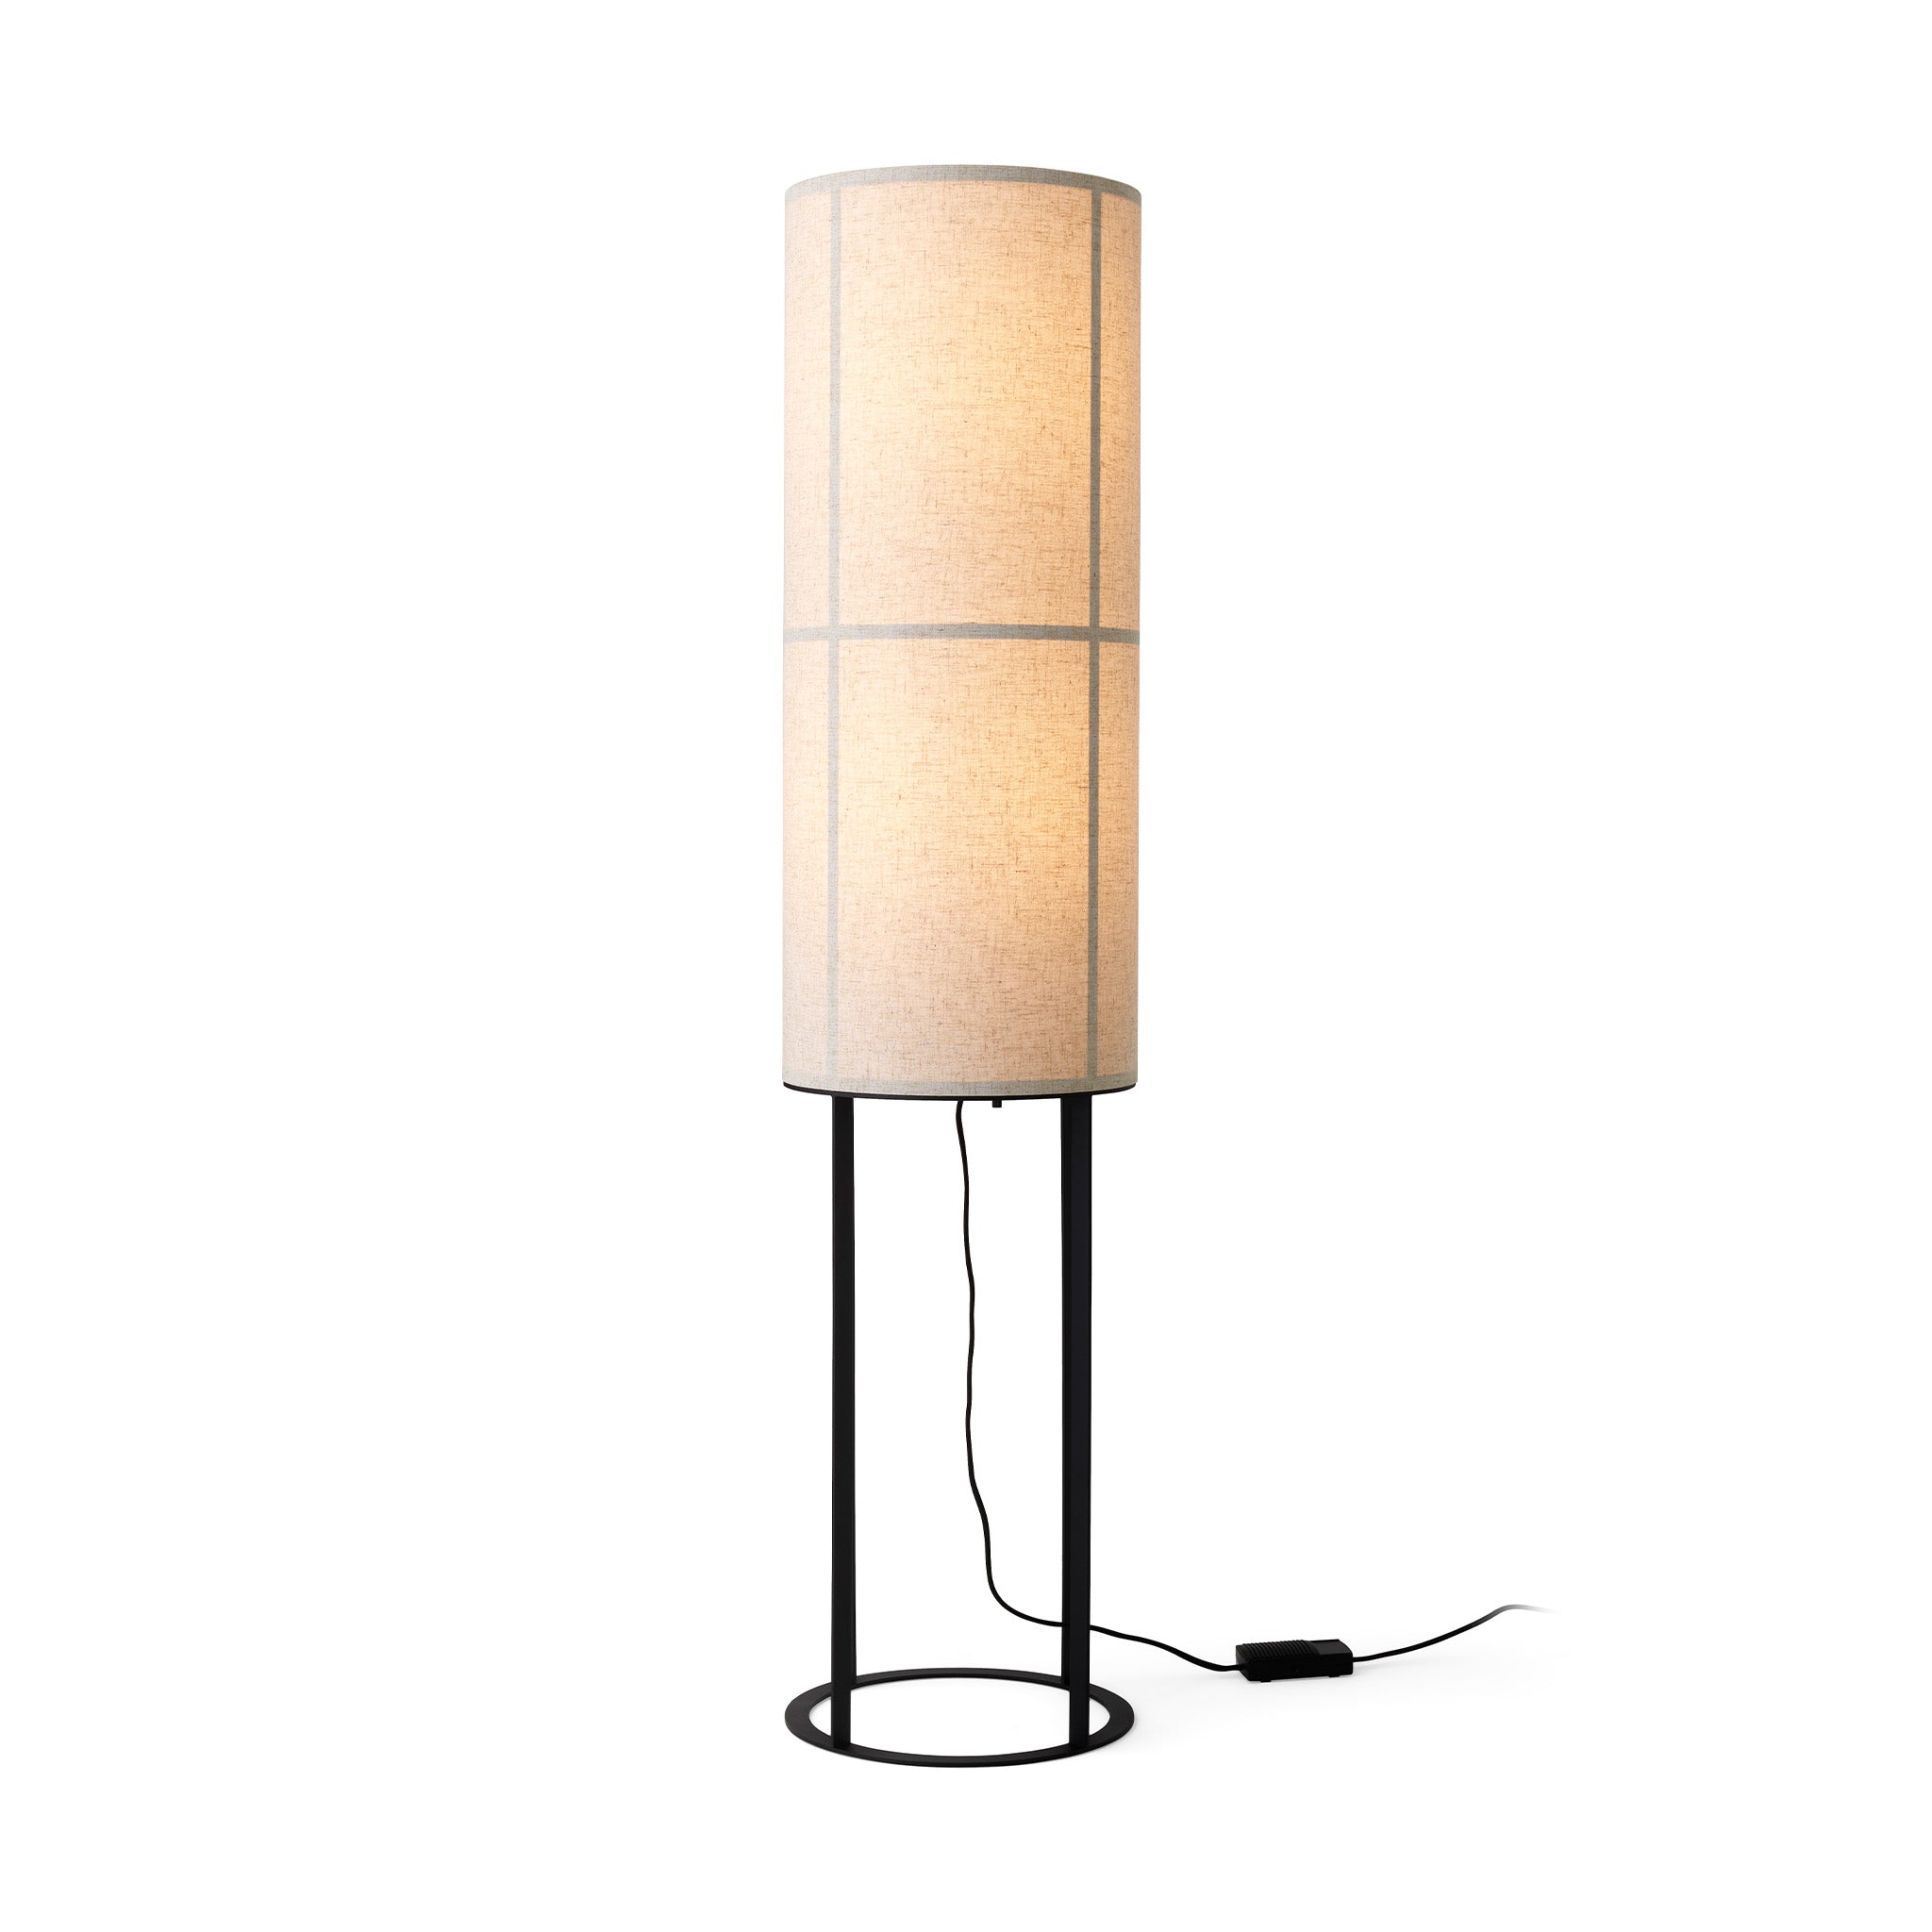 Hashira High Floor Lamp by Norm Architects